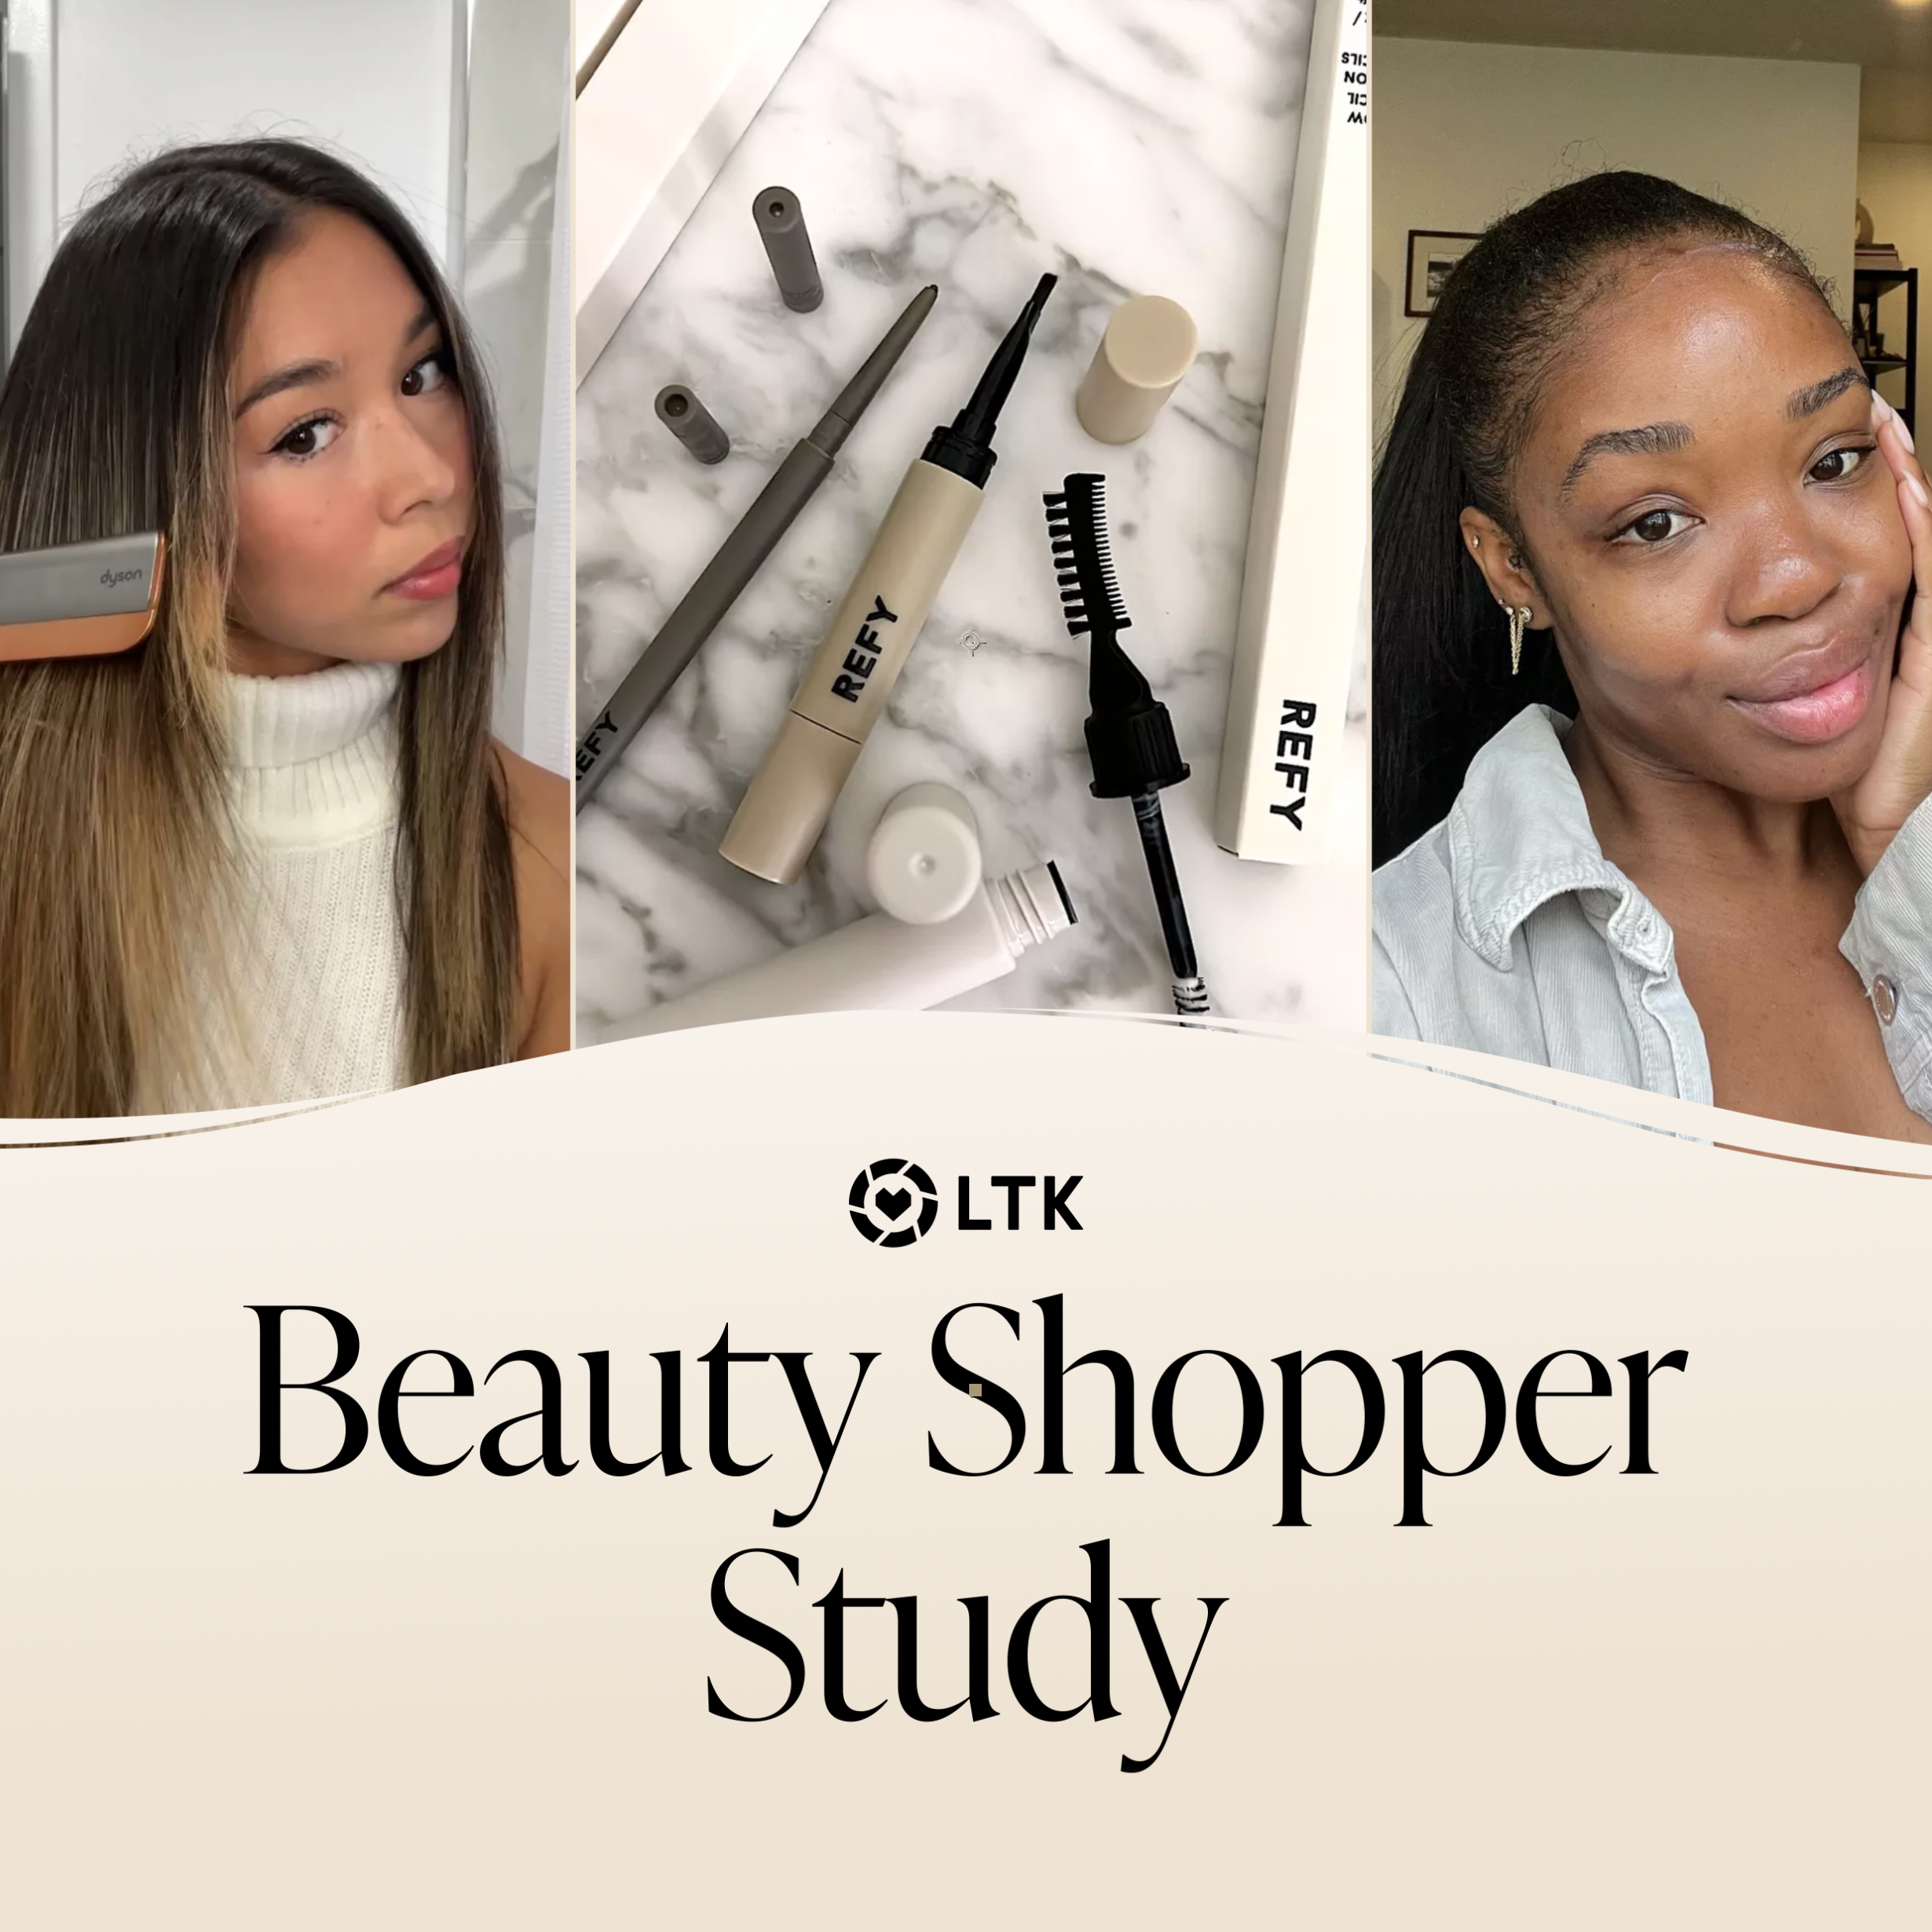 LTK Beauty Shopper Study: Consumers Turn to Creators As Most